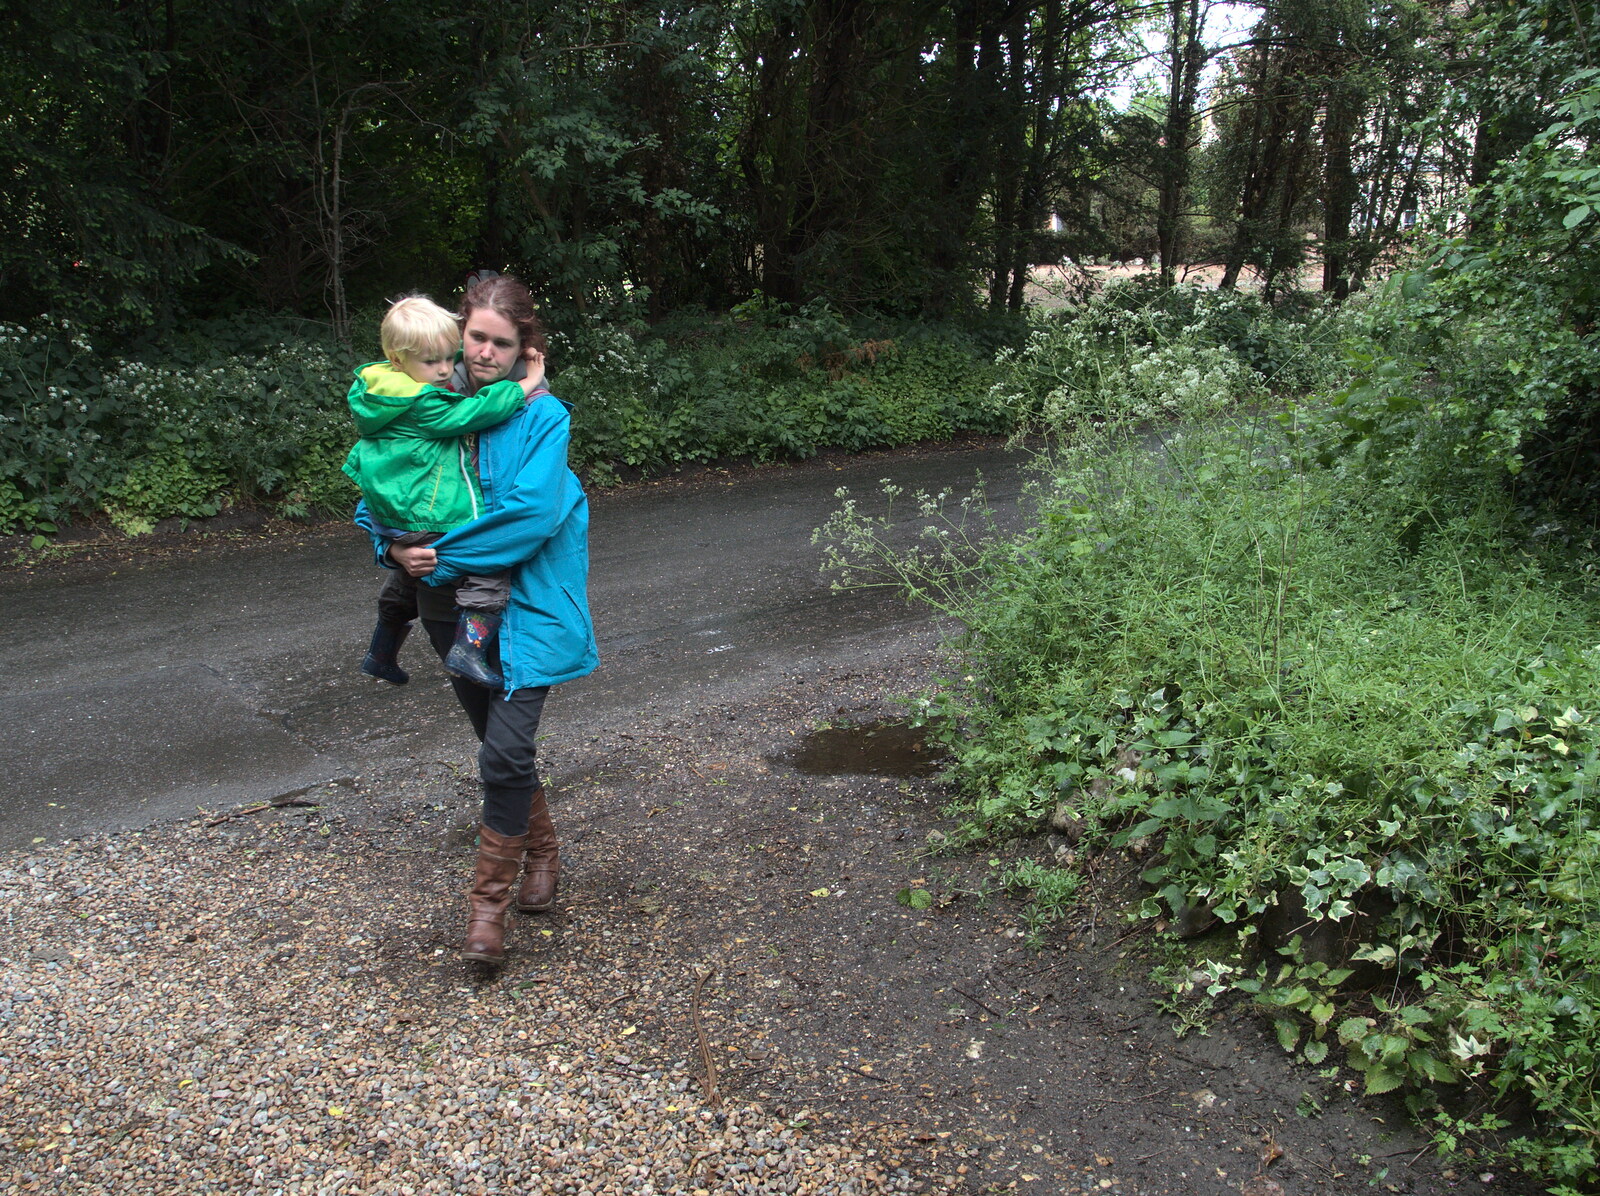 Isobel carries Gabes around from Thursday BSCC Bike Rides, Thelnetham and Earl Soham, Suffolk - 31st May 2015